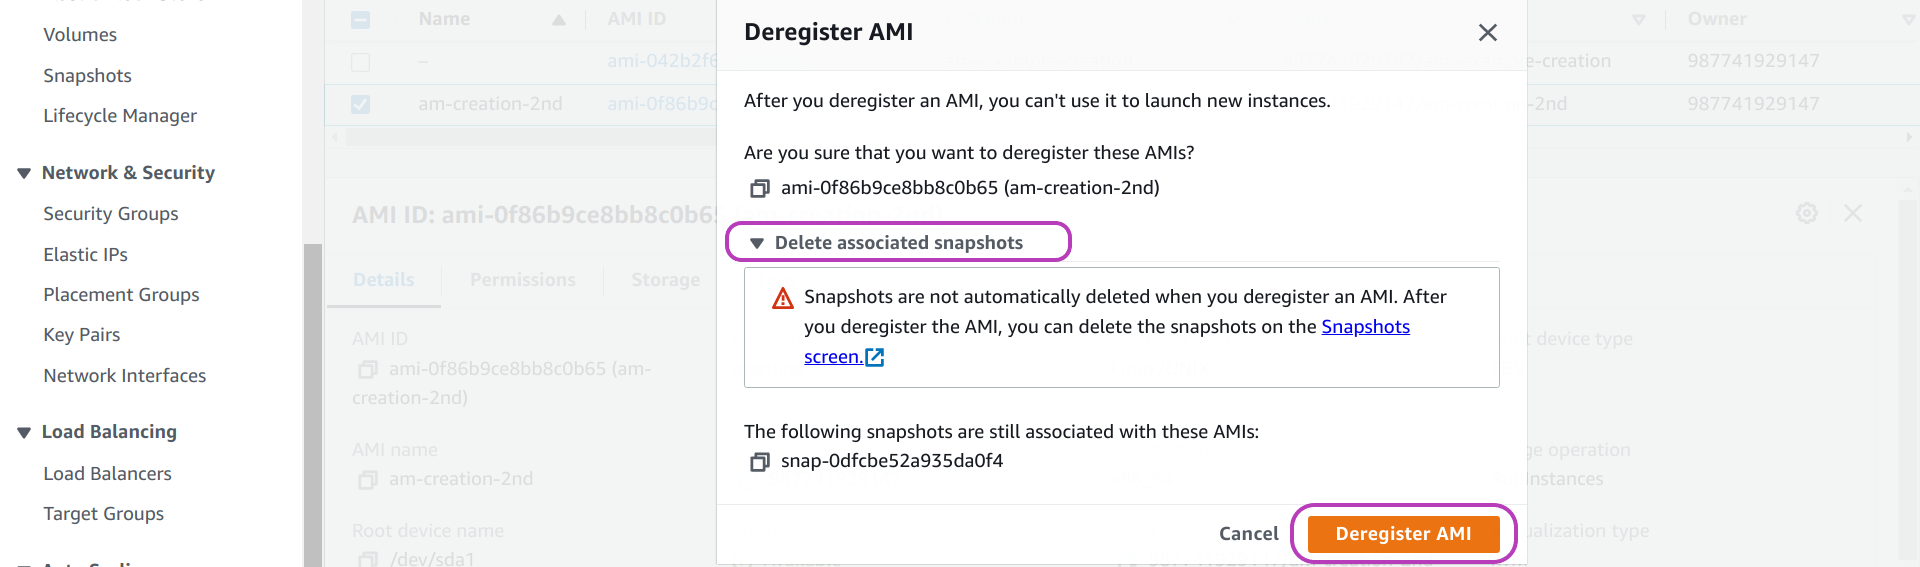 Screenshot of AWS Console "Deregister AMI" pop-up window in a browser, showing the drop-down option "Delete associated snapshots" and the button "Deregister AMI" circled.